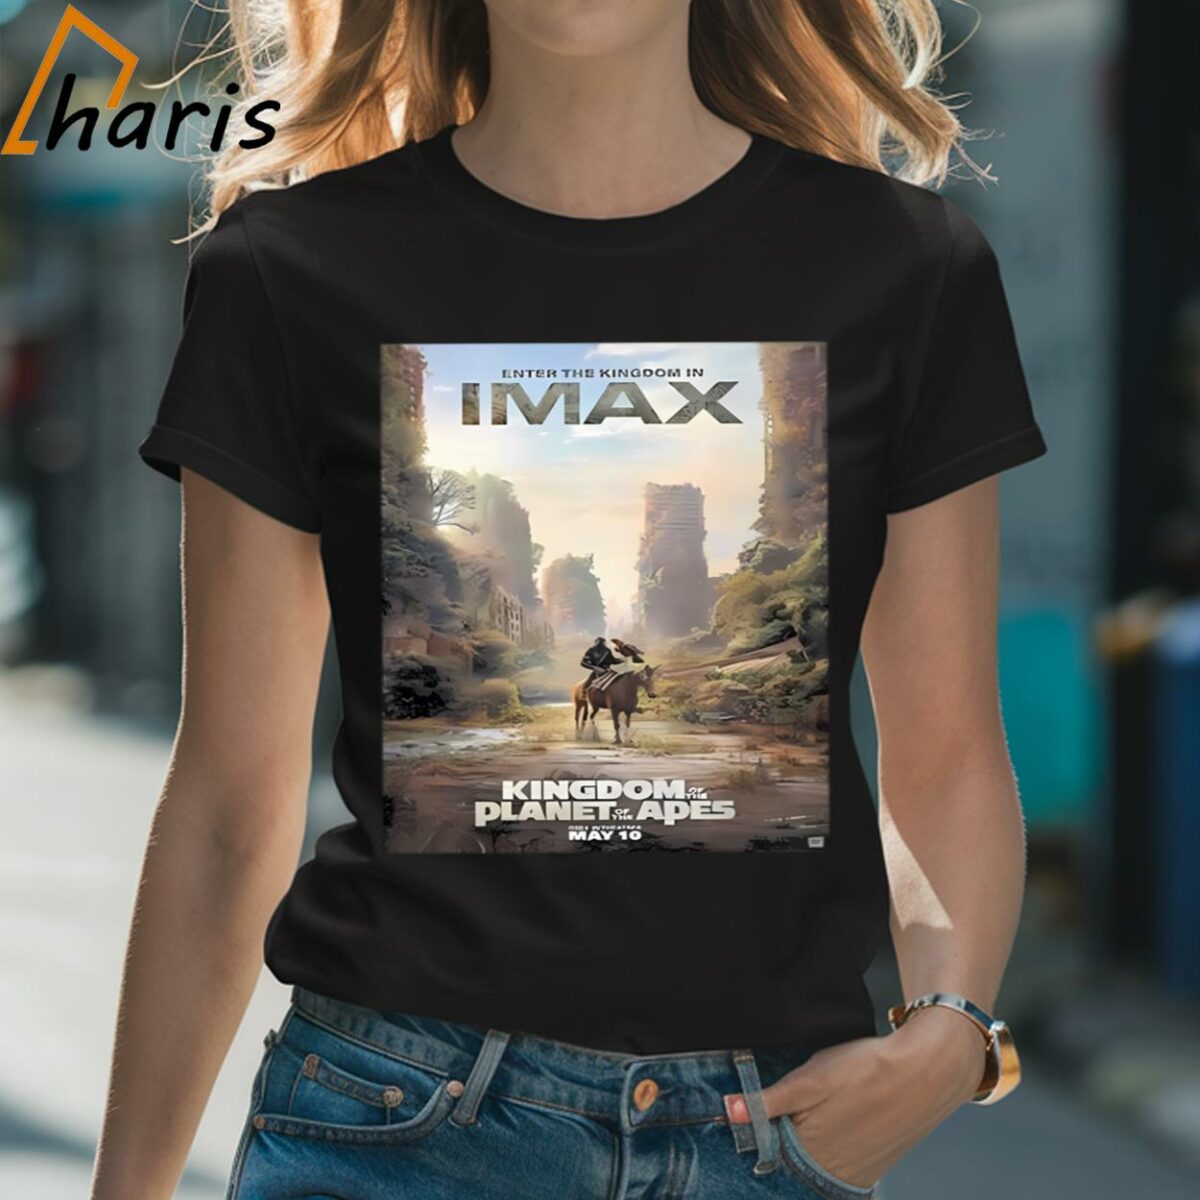 Enter The Kingdom In Imax Kingdom Of The Planet Of The Apes Shirt 2 Shirt